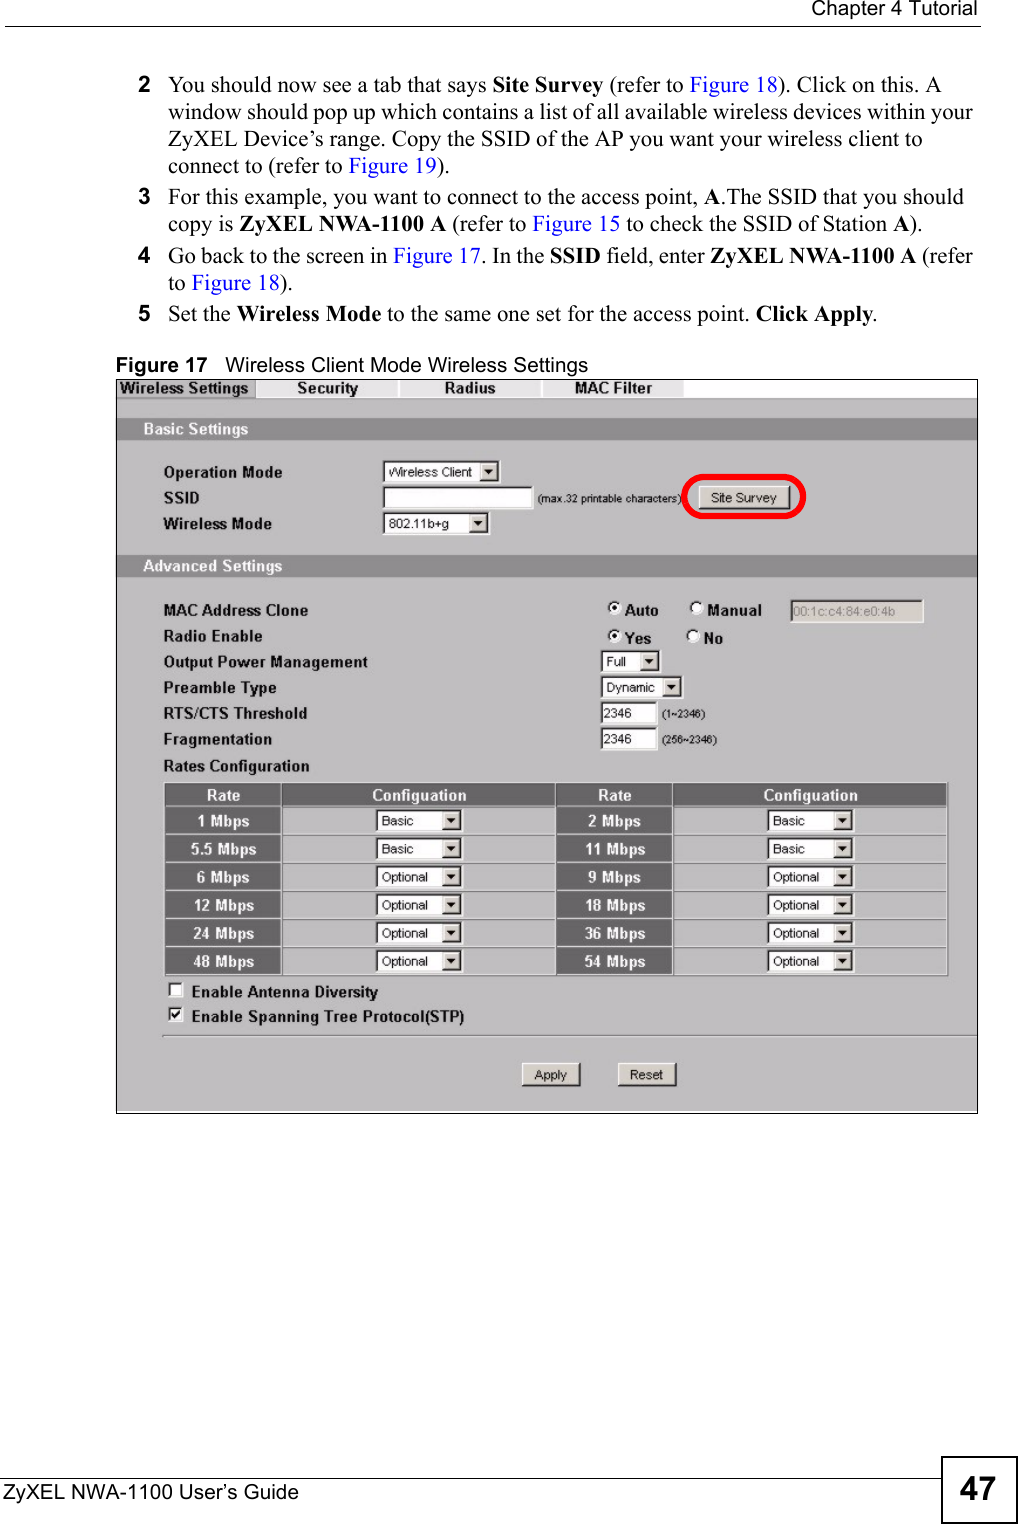  Chapter 4 TutorialZyXEL NWA-1100 User’s Guide 472You should now see a tab that says Site Survey (refer to Figure 18). Click on this. A window should pop up which contains a list of all available wireless devices within your ZyXEL Device’s range. Copy the SSID of the AP you want your wireless client to connect to (refer to Figure 19).3For this example, you want to connect to the access point, A.The SSID that you should copy is ZyXEL NWA-1100 A (refer to Figure 15 to check the SSID of Station A).4Go back to the screen in Figure 17. In the SSID field, enter ZyXEL NWA-1100 A (refer to Figure 18).5Set the Wireless Mode to the same one set for the access point. Click Apply.Figure 17   Wireless Client Mode Wireless Settings